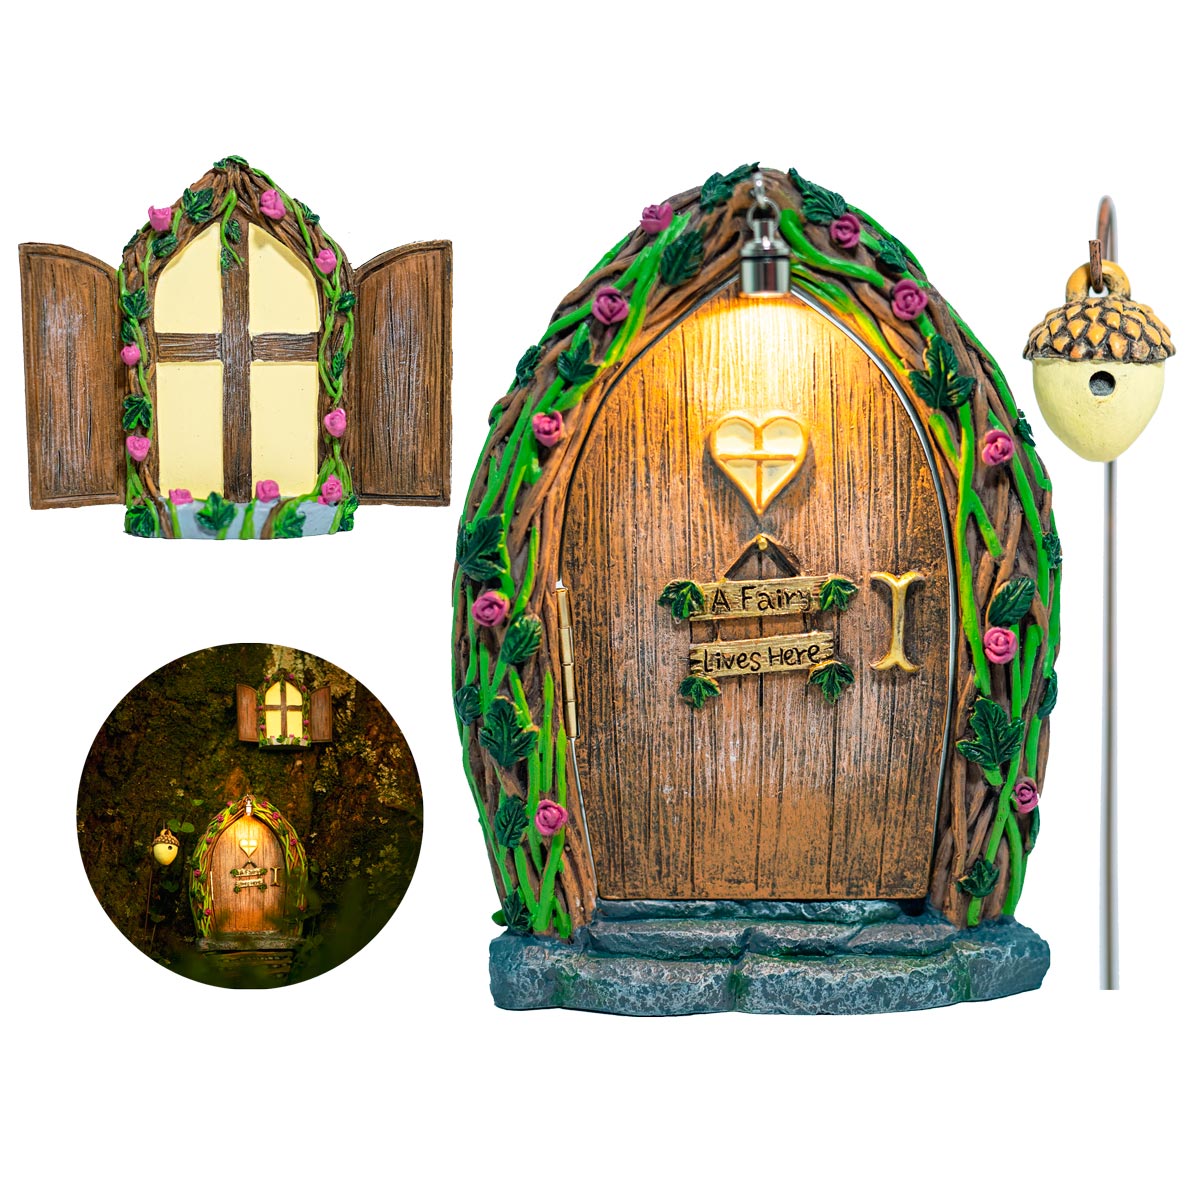 Opening fairy door and window for trees with light glow in the dark